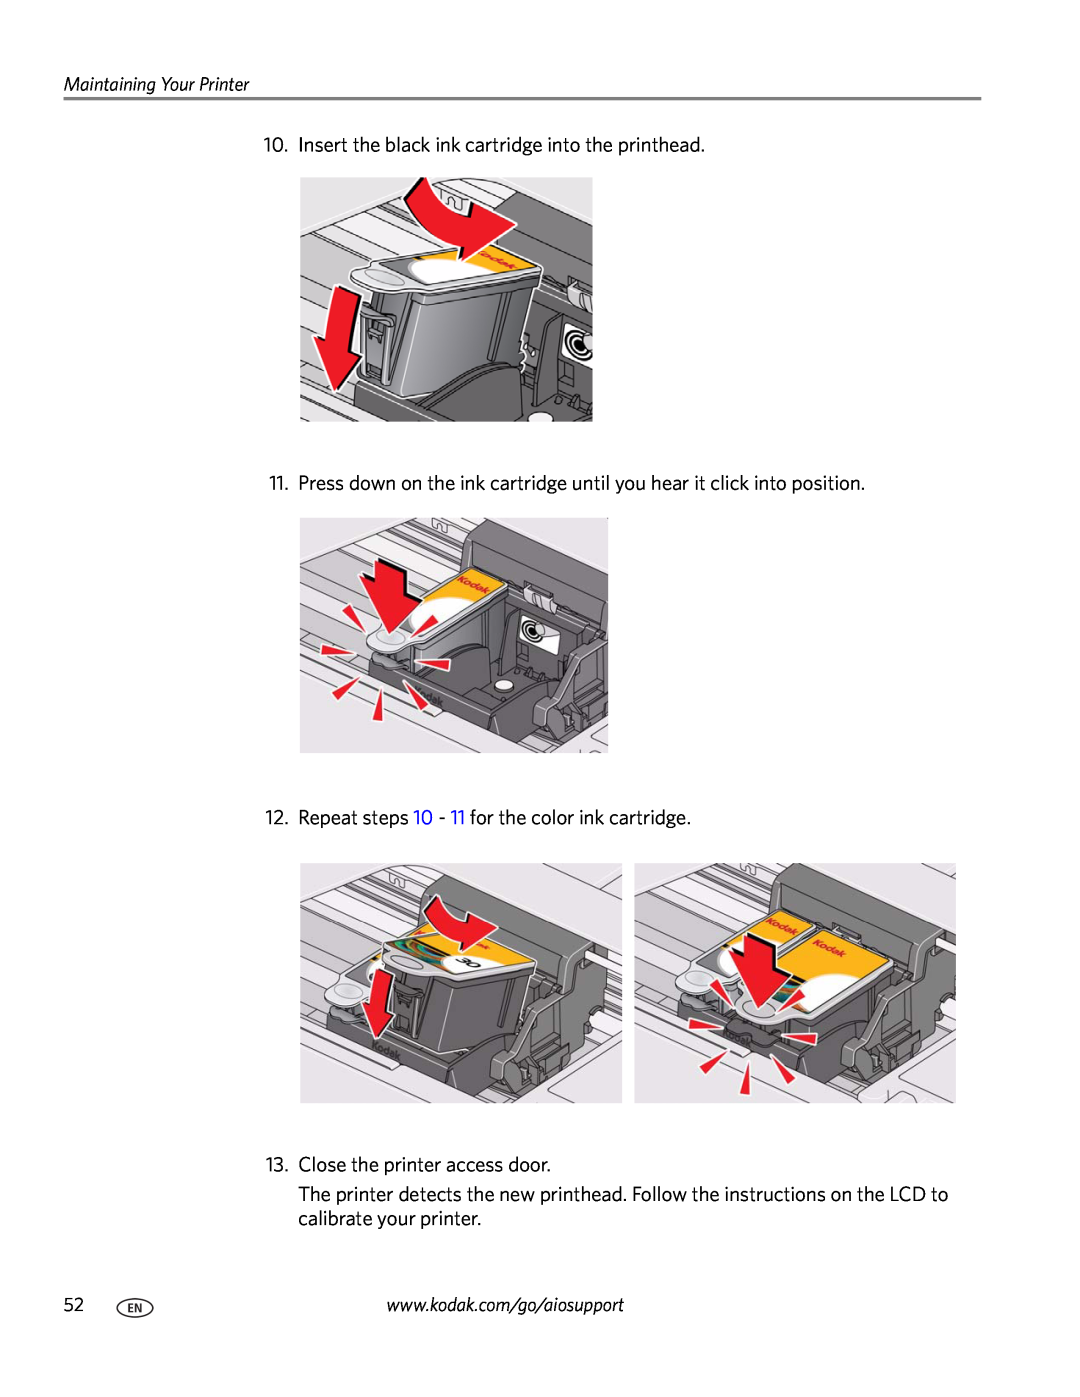 Kodak C110 manual Insert the black ink cartridge into the printhead, Repeat steps 10 - 11 for the color ink cartridge 